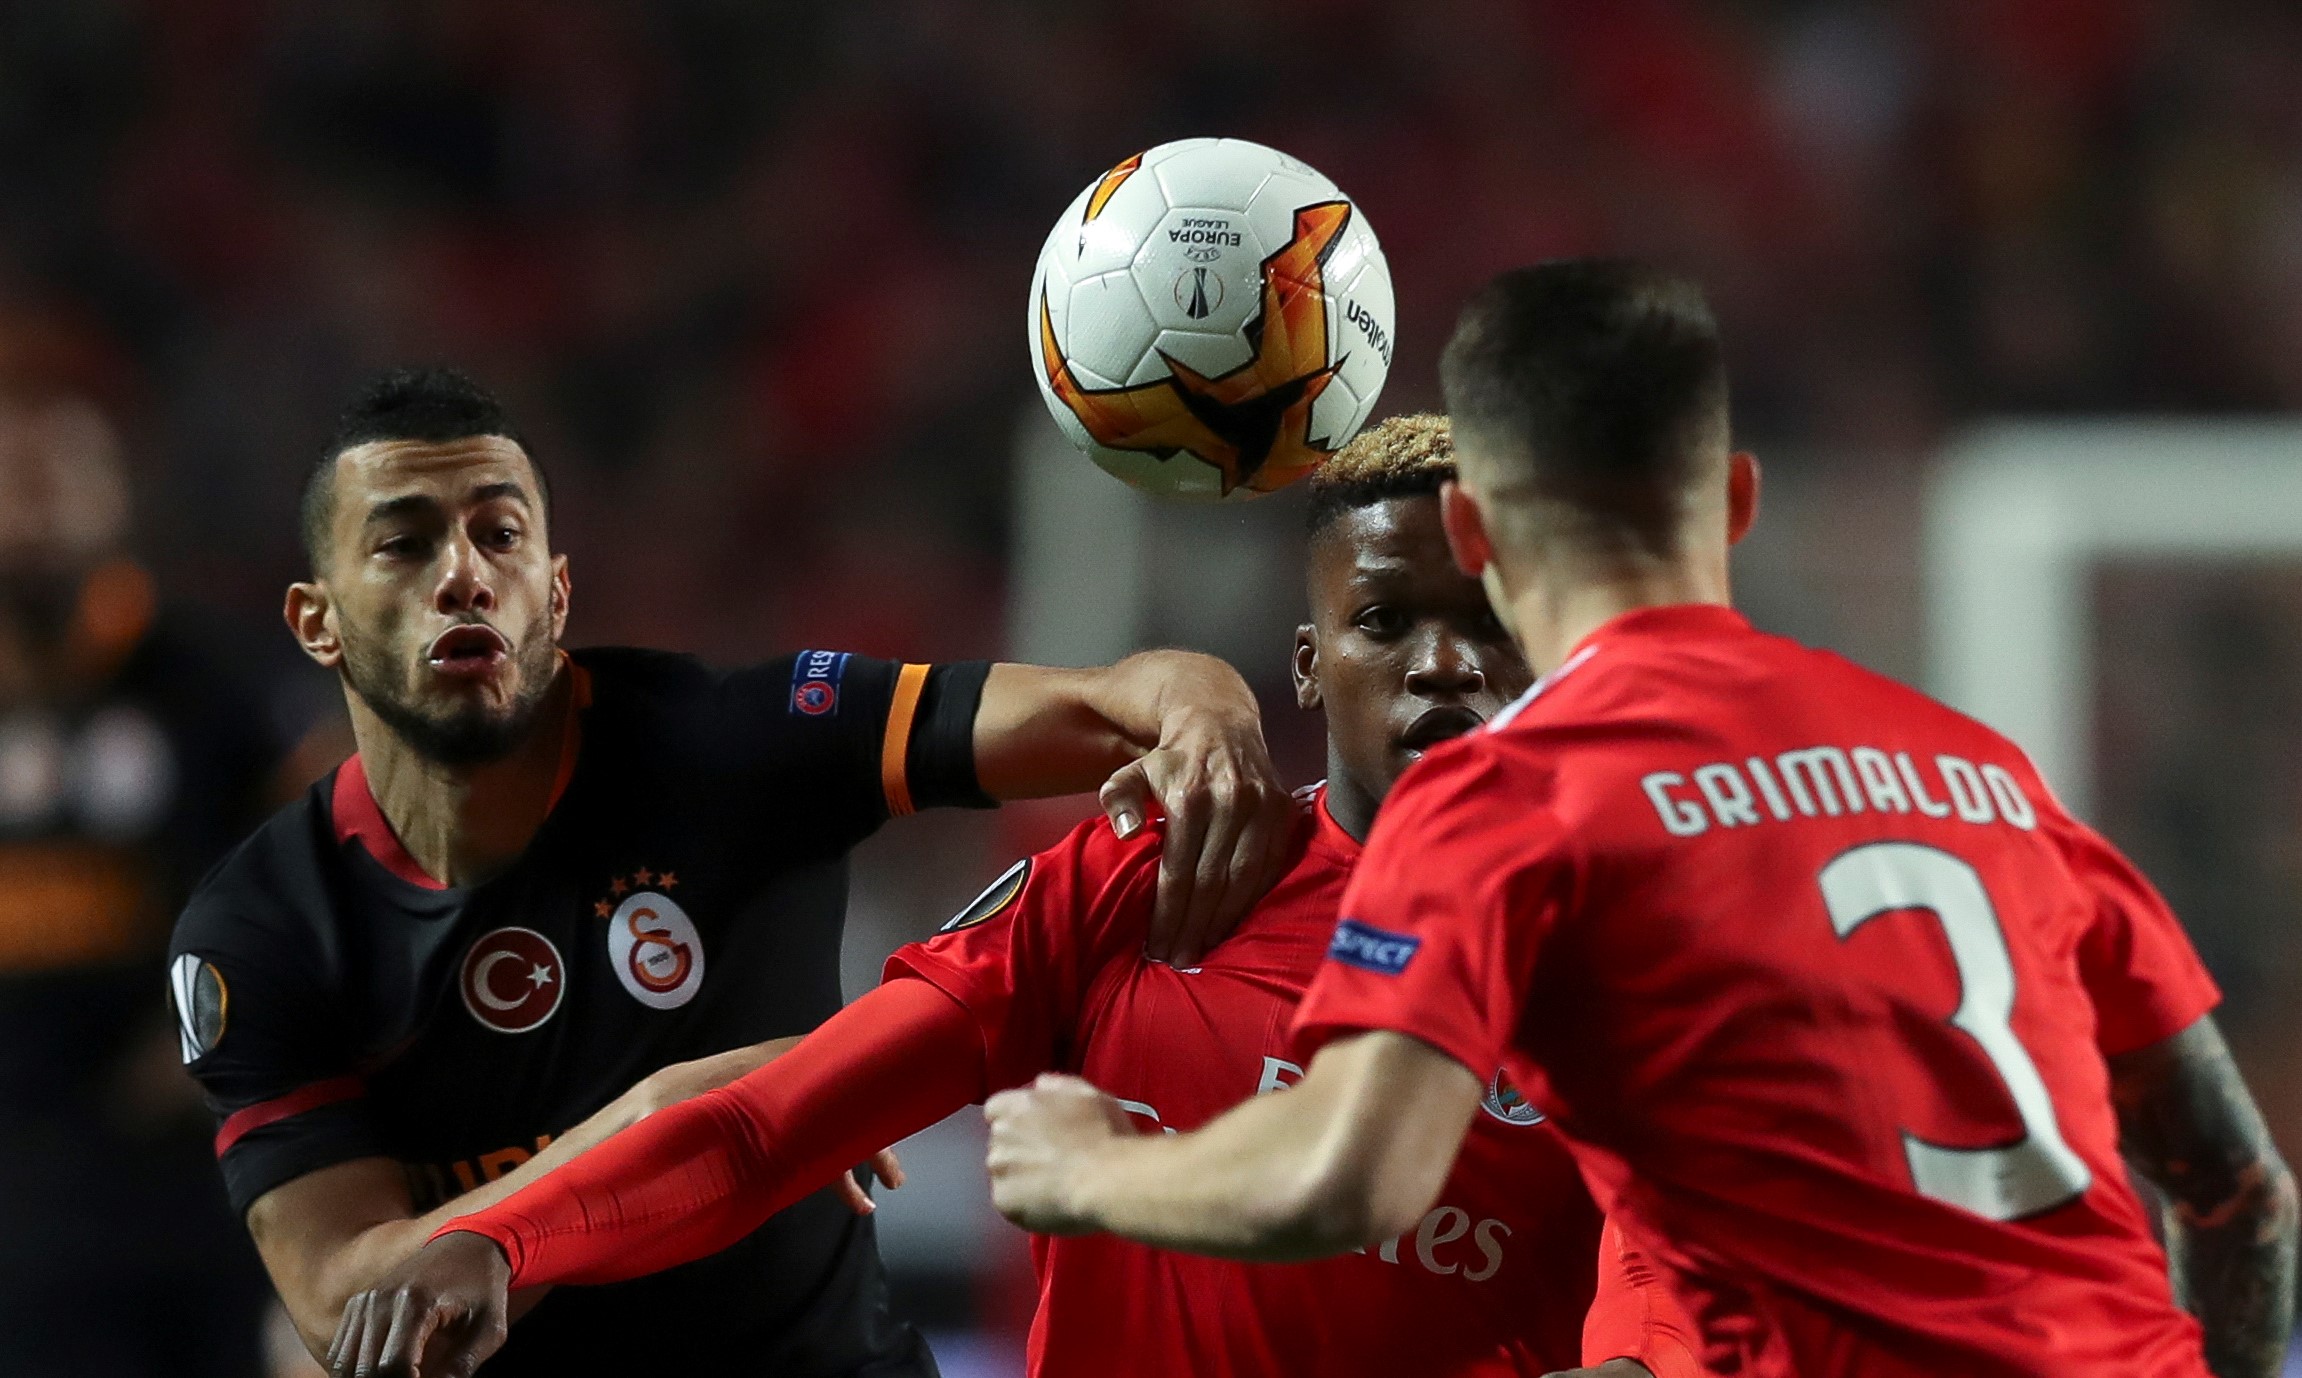 epa07386280 Benfica players Grimaldo (R) and Gedson Fernandes (C) in action against Galatasaray's Younes Balhanda (L) during their UEFA Europe League round of 32 second leg soccer match at Luz Stadium, in Lisbon, Portugal, 21 February 2019.  EPA/MANUEL DE ALMEIDA